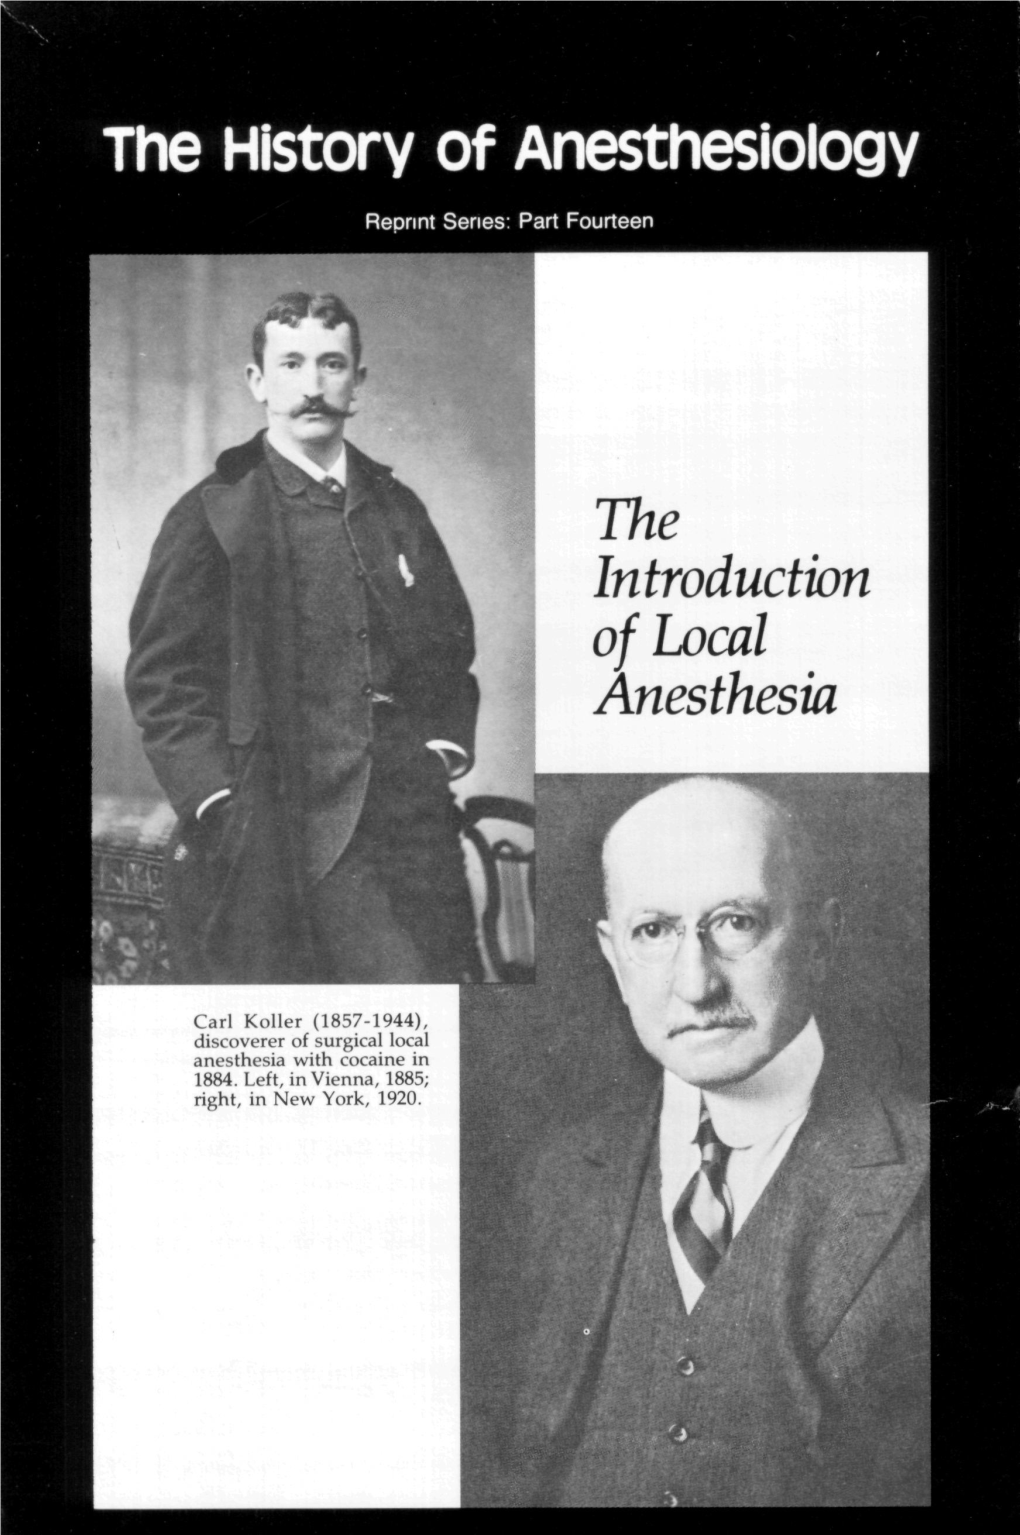 The History of Anesthesiology